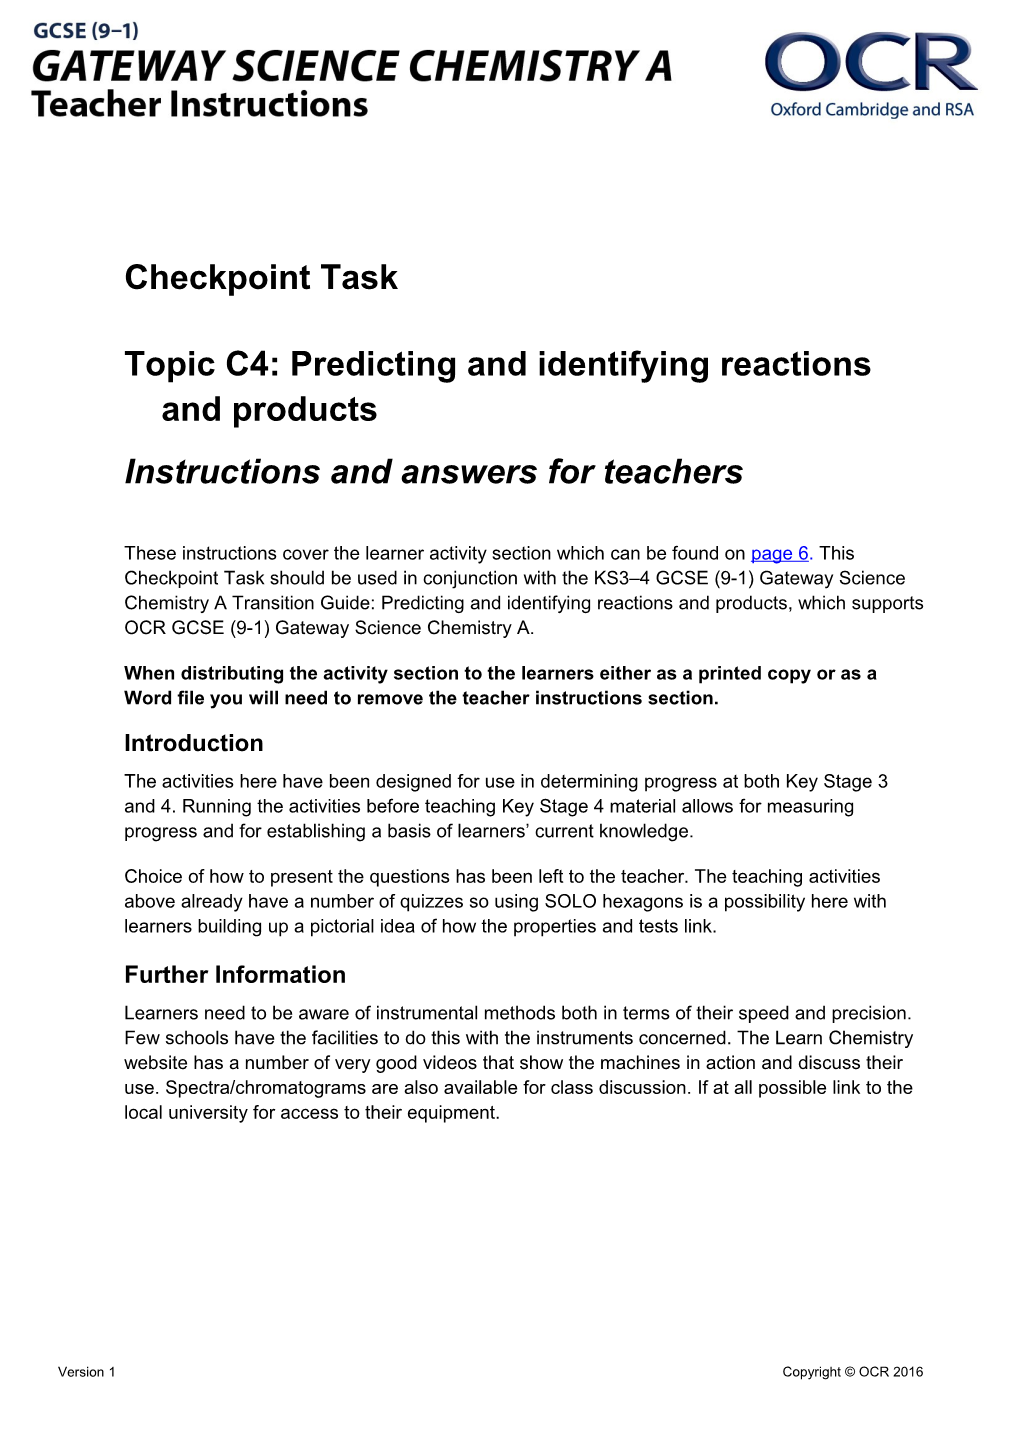 OCR GCSE (9-1) Gateway Science Chemistry a Checkpoint Task - Predicting and Identifying